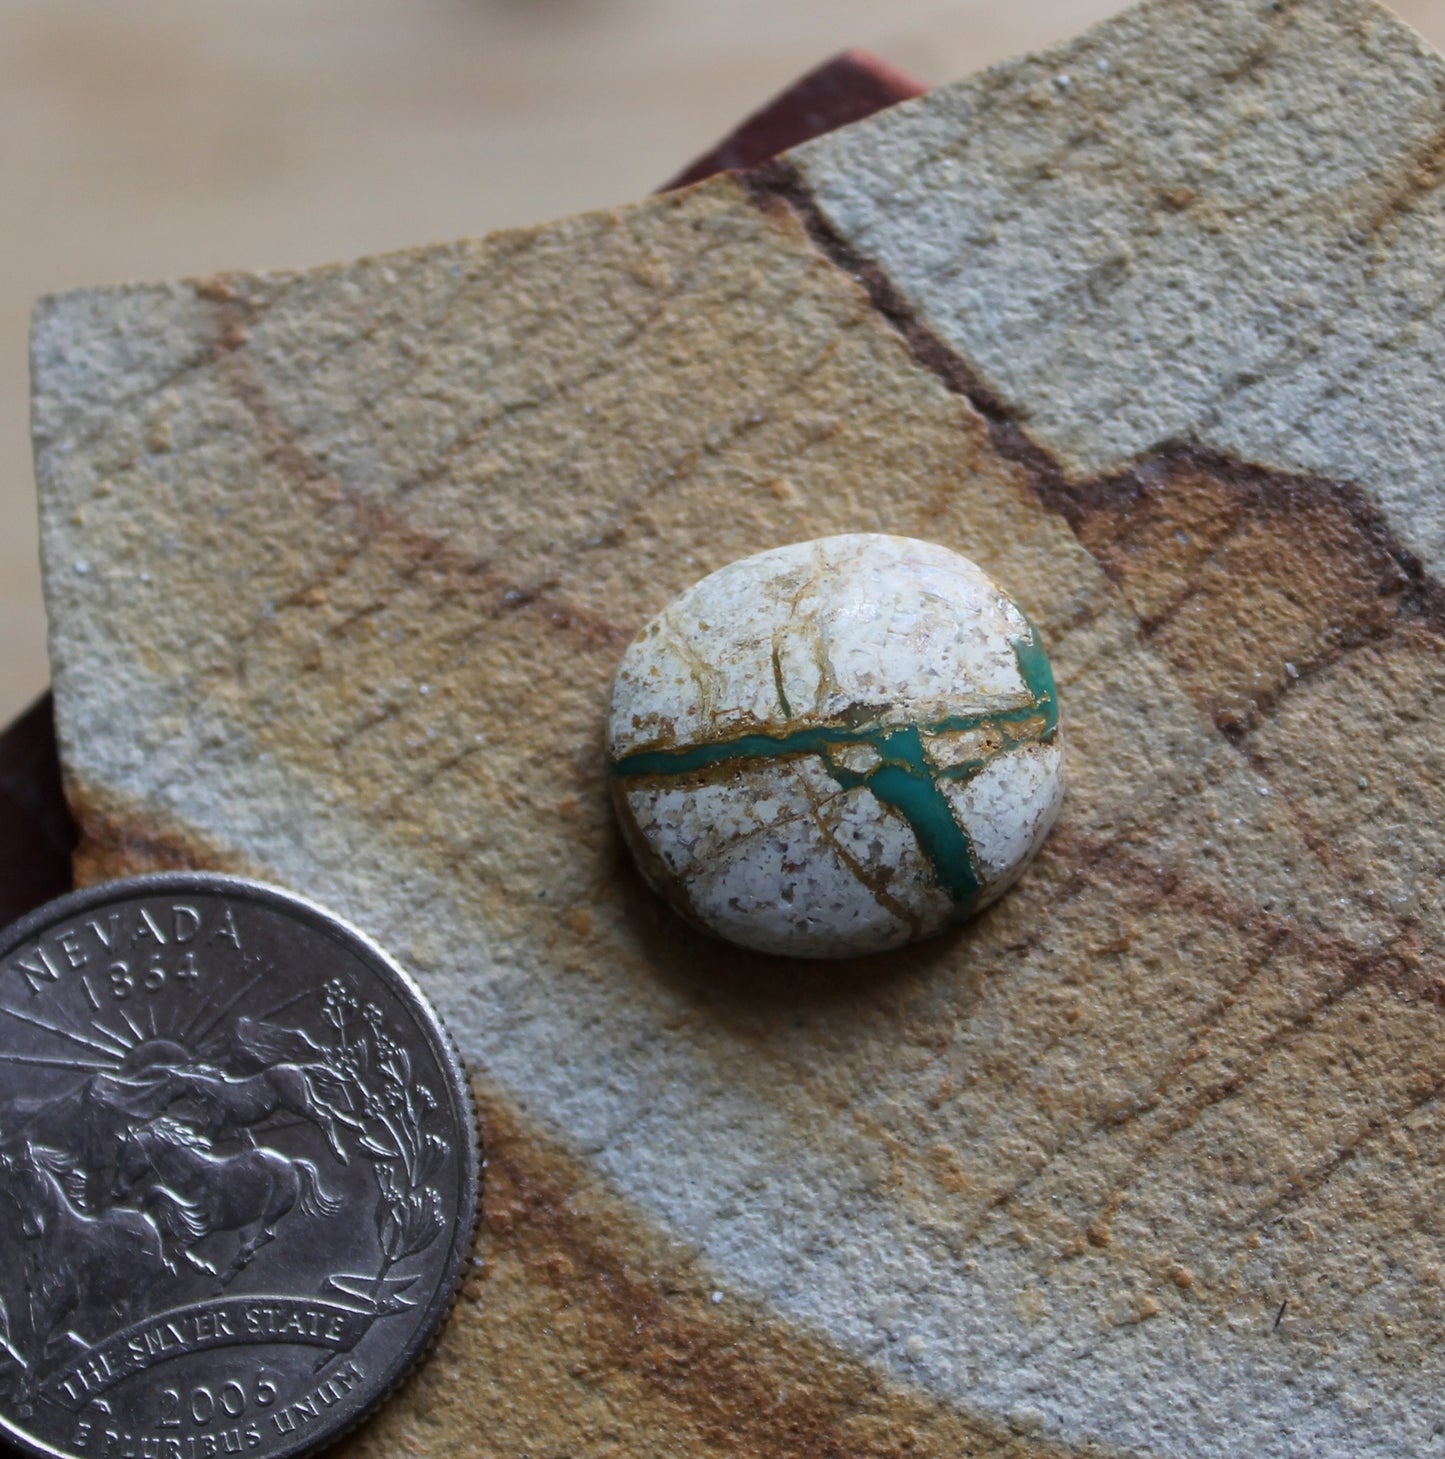 11 carat boulder-cut Stone Mountain Turquoise cabochon with green veins